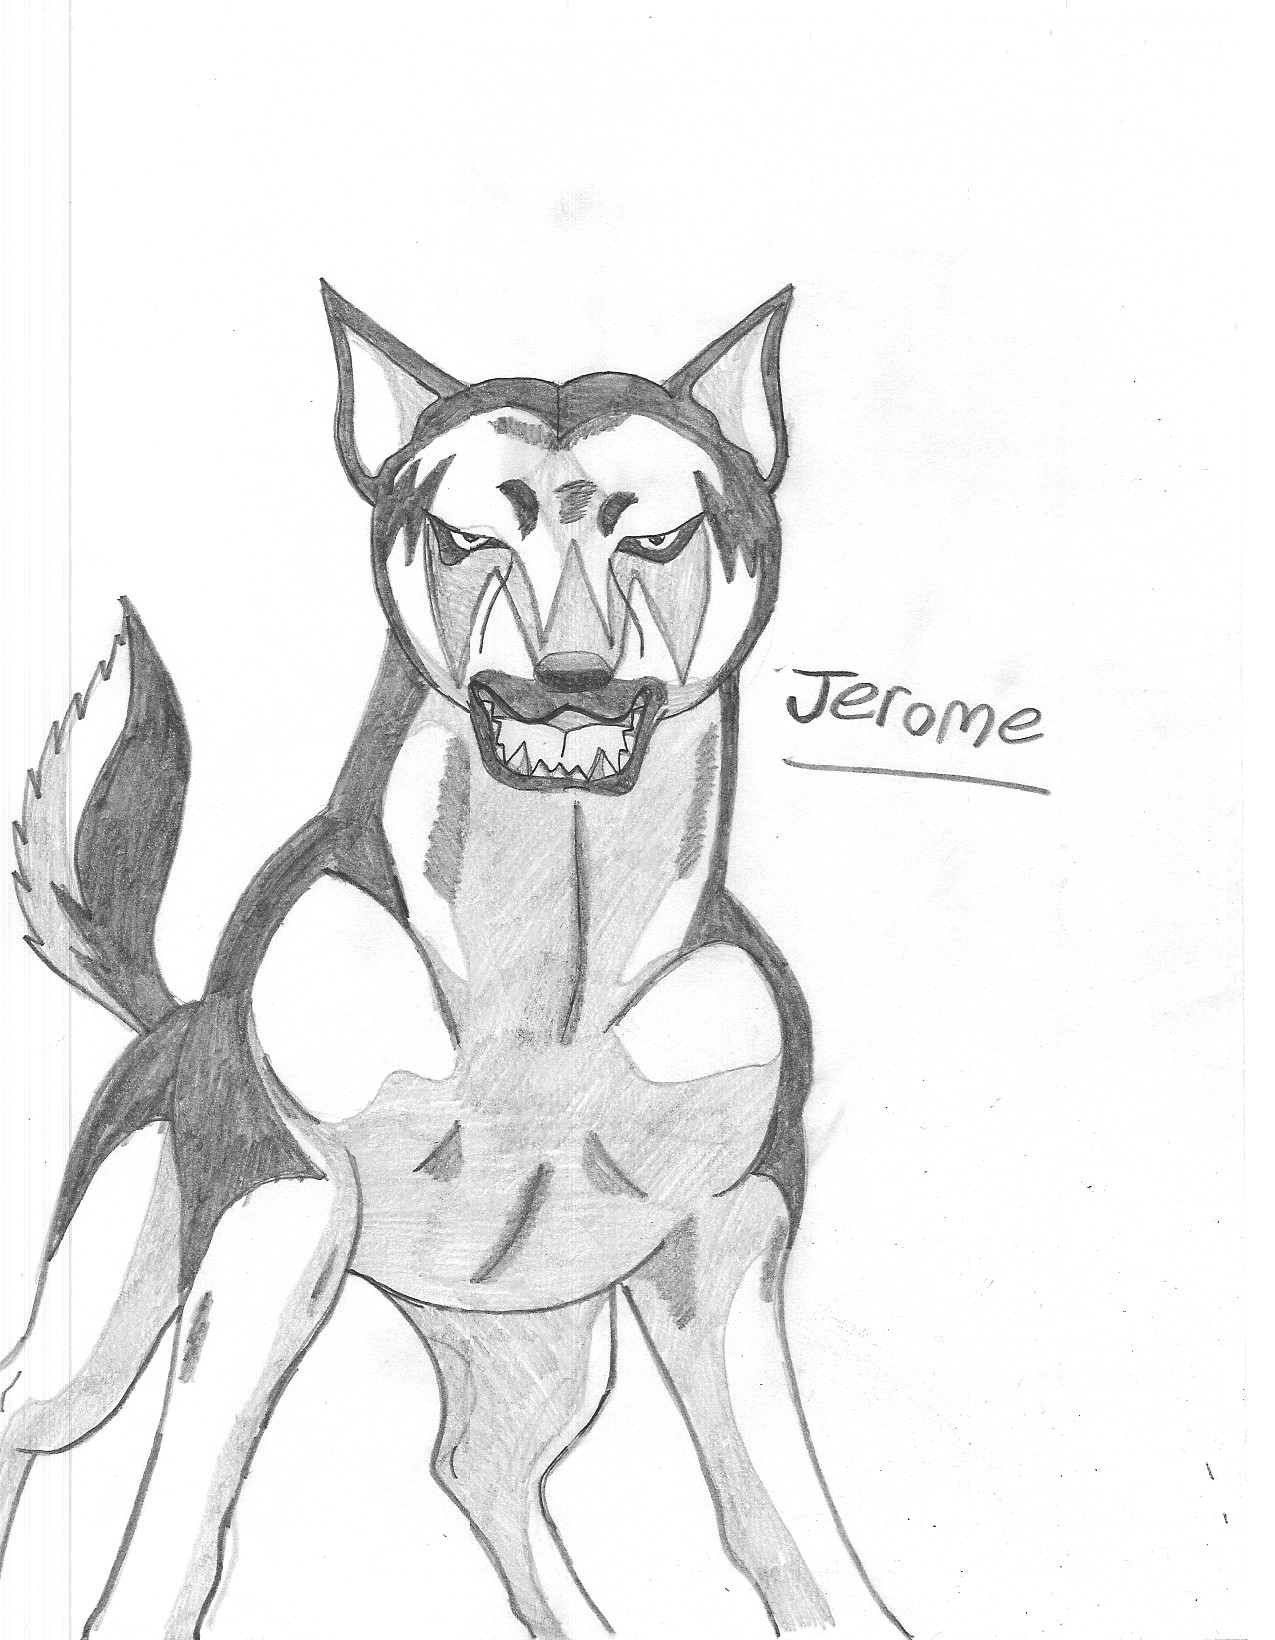 Jerome by IceWolfGurl